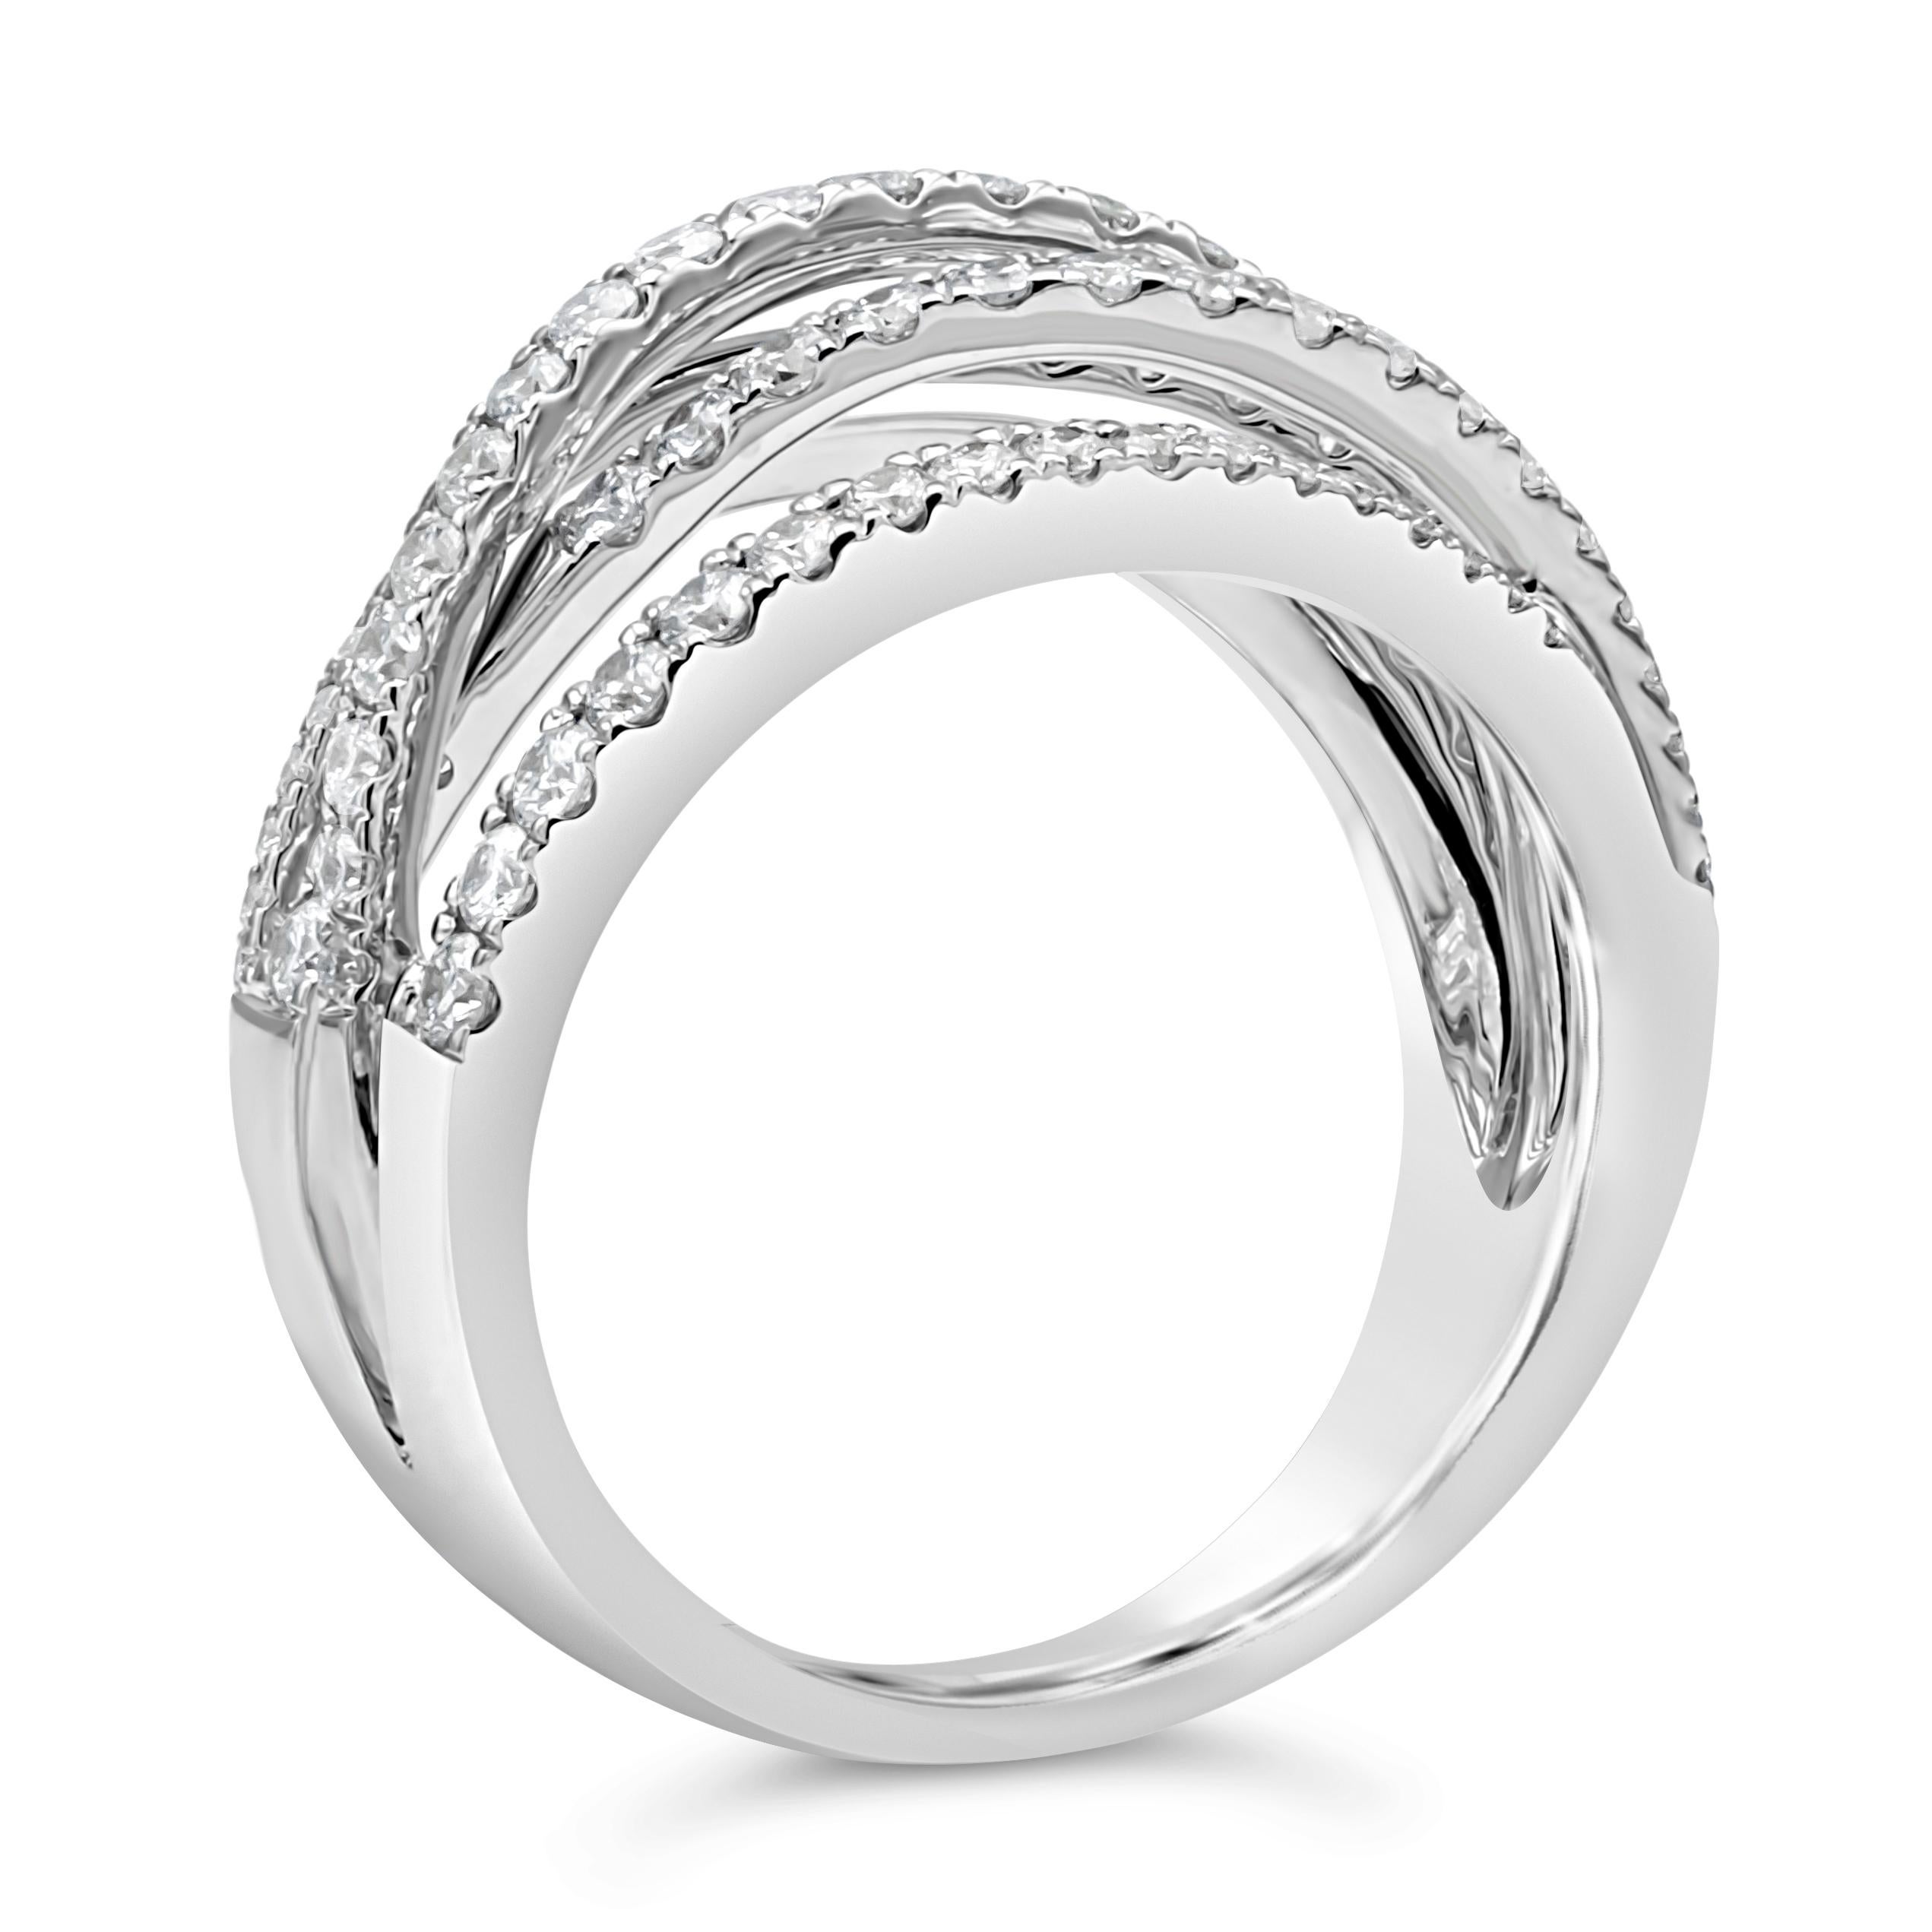 A fascinating fashion ring showcasing five rows of brilliant round diamond weighing 1.13 carats total, F-G color and VS-Si in clarity. Set in an entwined galaxy design. Made in 18K White Gold, Size 6.5 US

Style available in different price ranges.